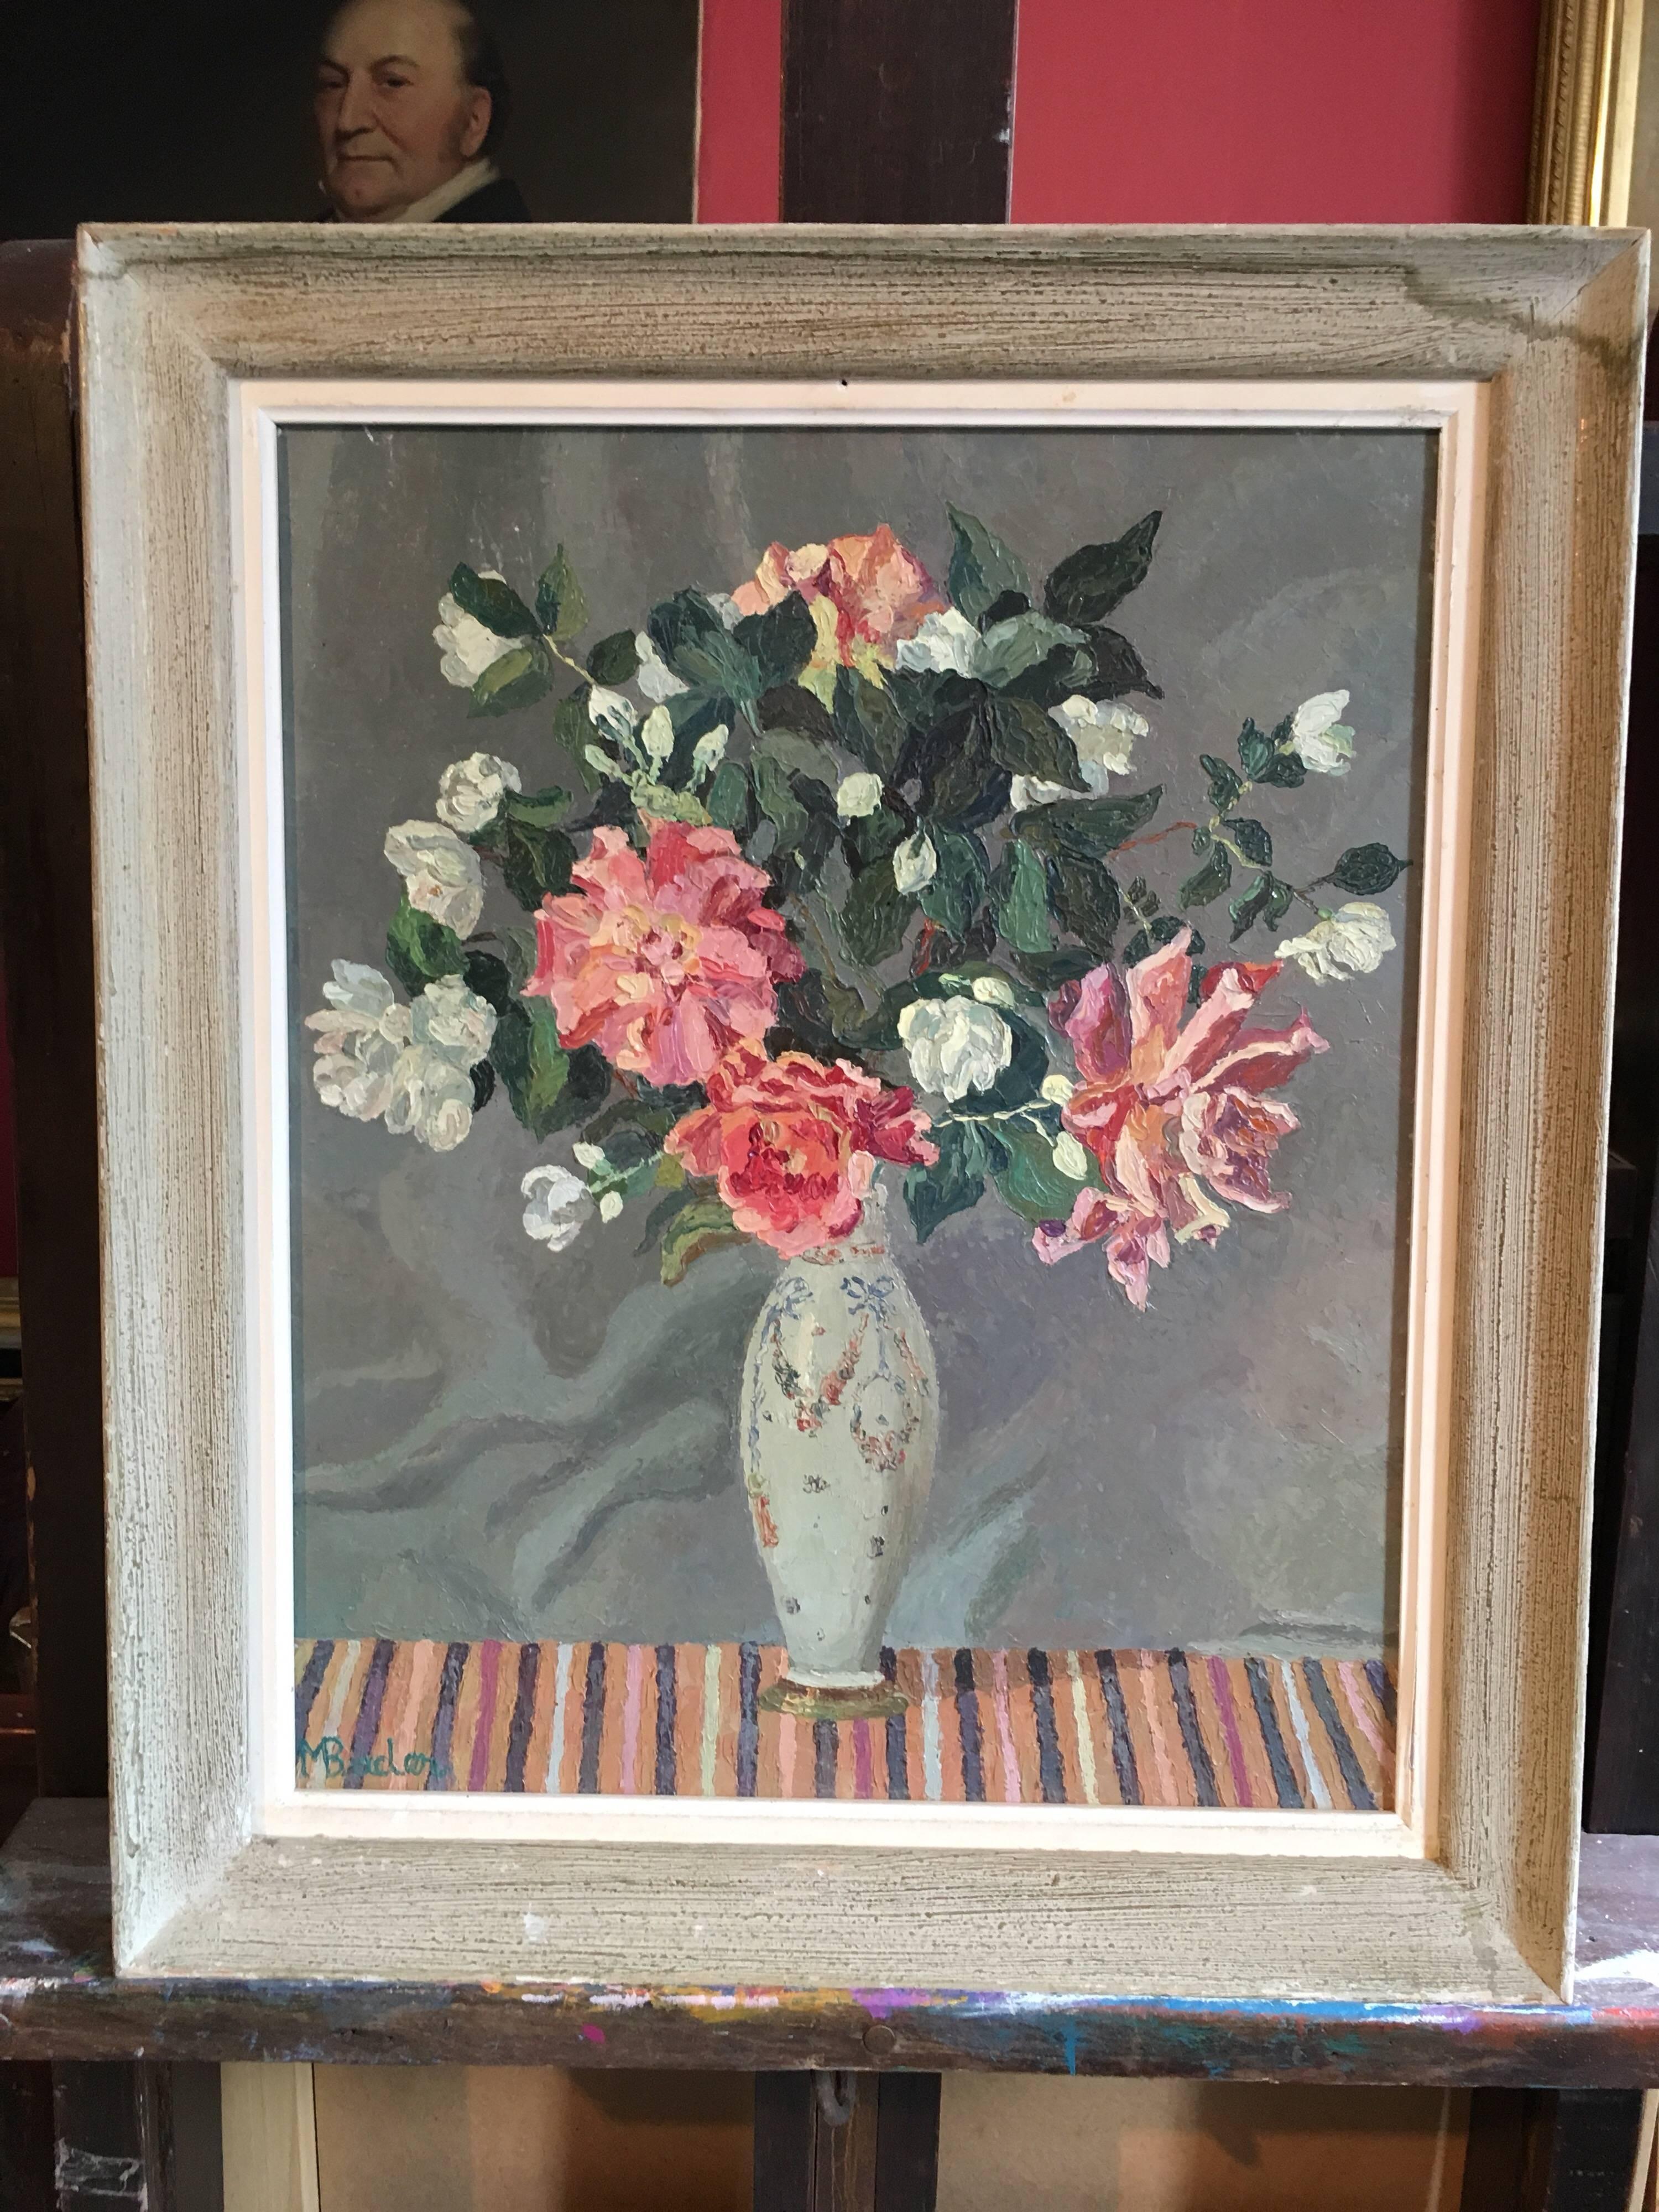 'Fleurs' French bouquet, floral oil painting, signed.
By French artist 'M.Bader', 20th century.
Signed by the artist on the lower left hand corner.
Signed and titled verso.
Oil painting on board, framed.
Framed size: 22 x 18.5